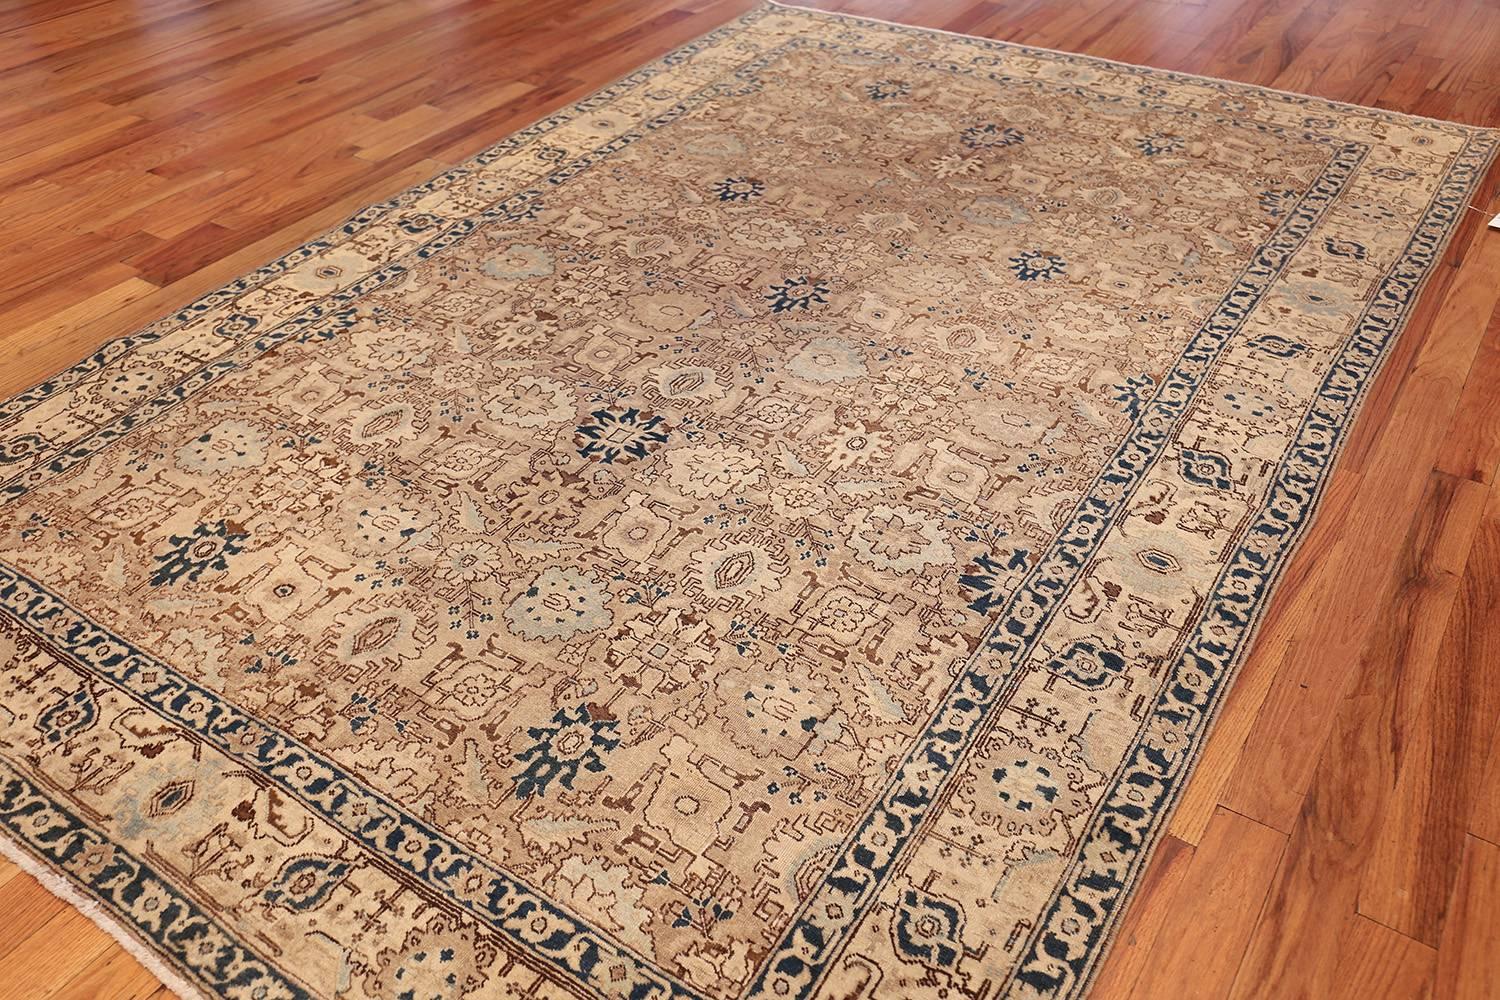 Decorative Neutral Antique Room Size Persian Tabriz Rug. Size: 6 ft 4 in x 10 ft 8